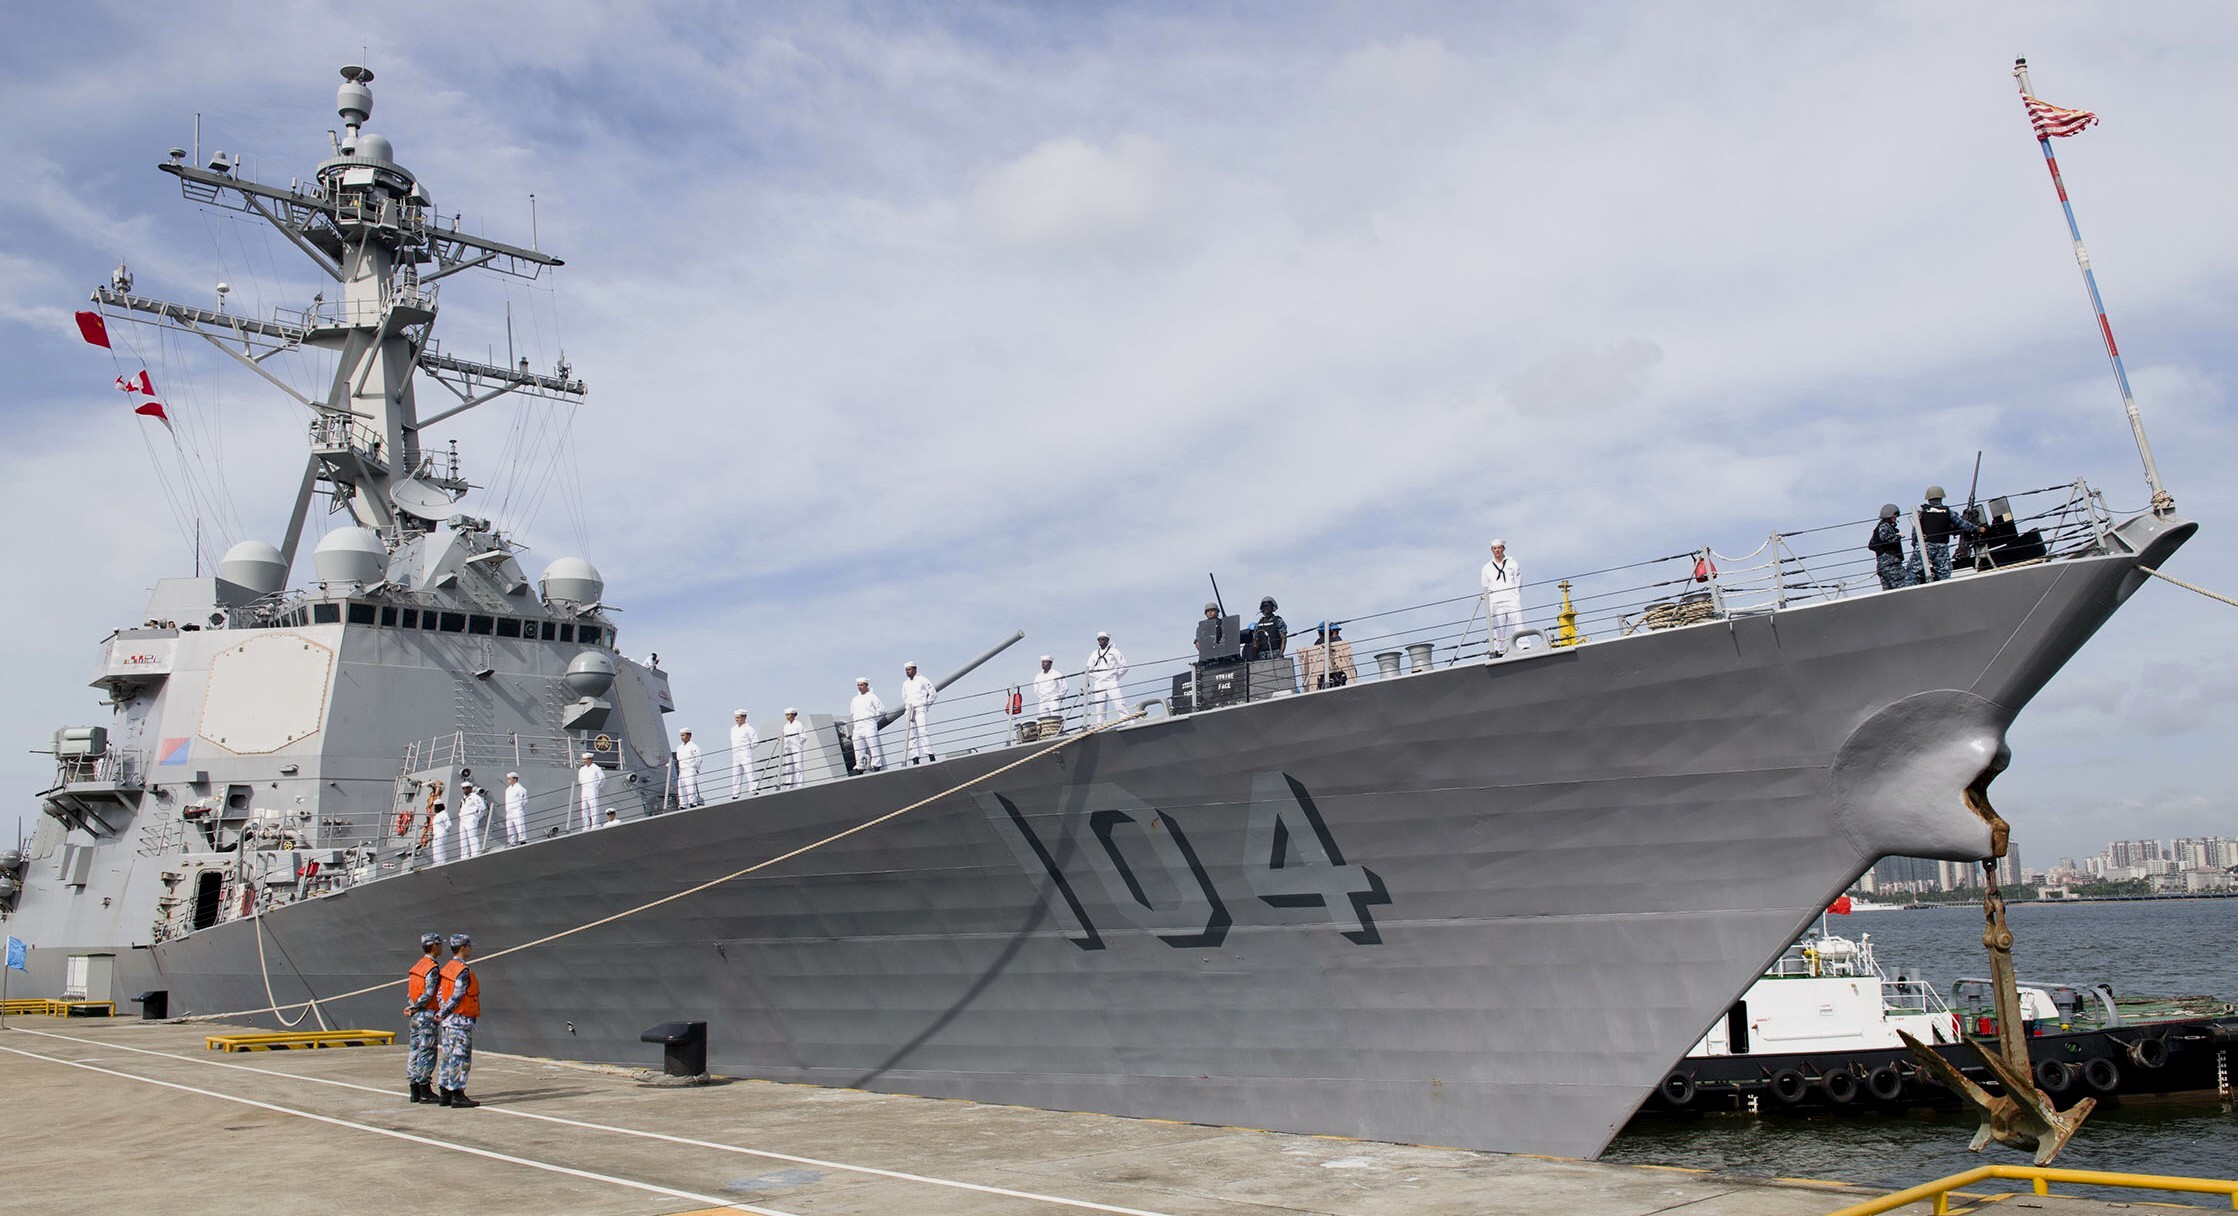 ddg-104 uss sterett arleigh burke class guided missile destroyer aegis us navy zhanjiang china 43